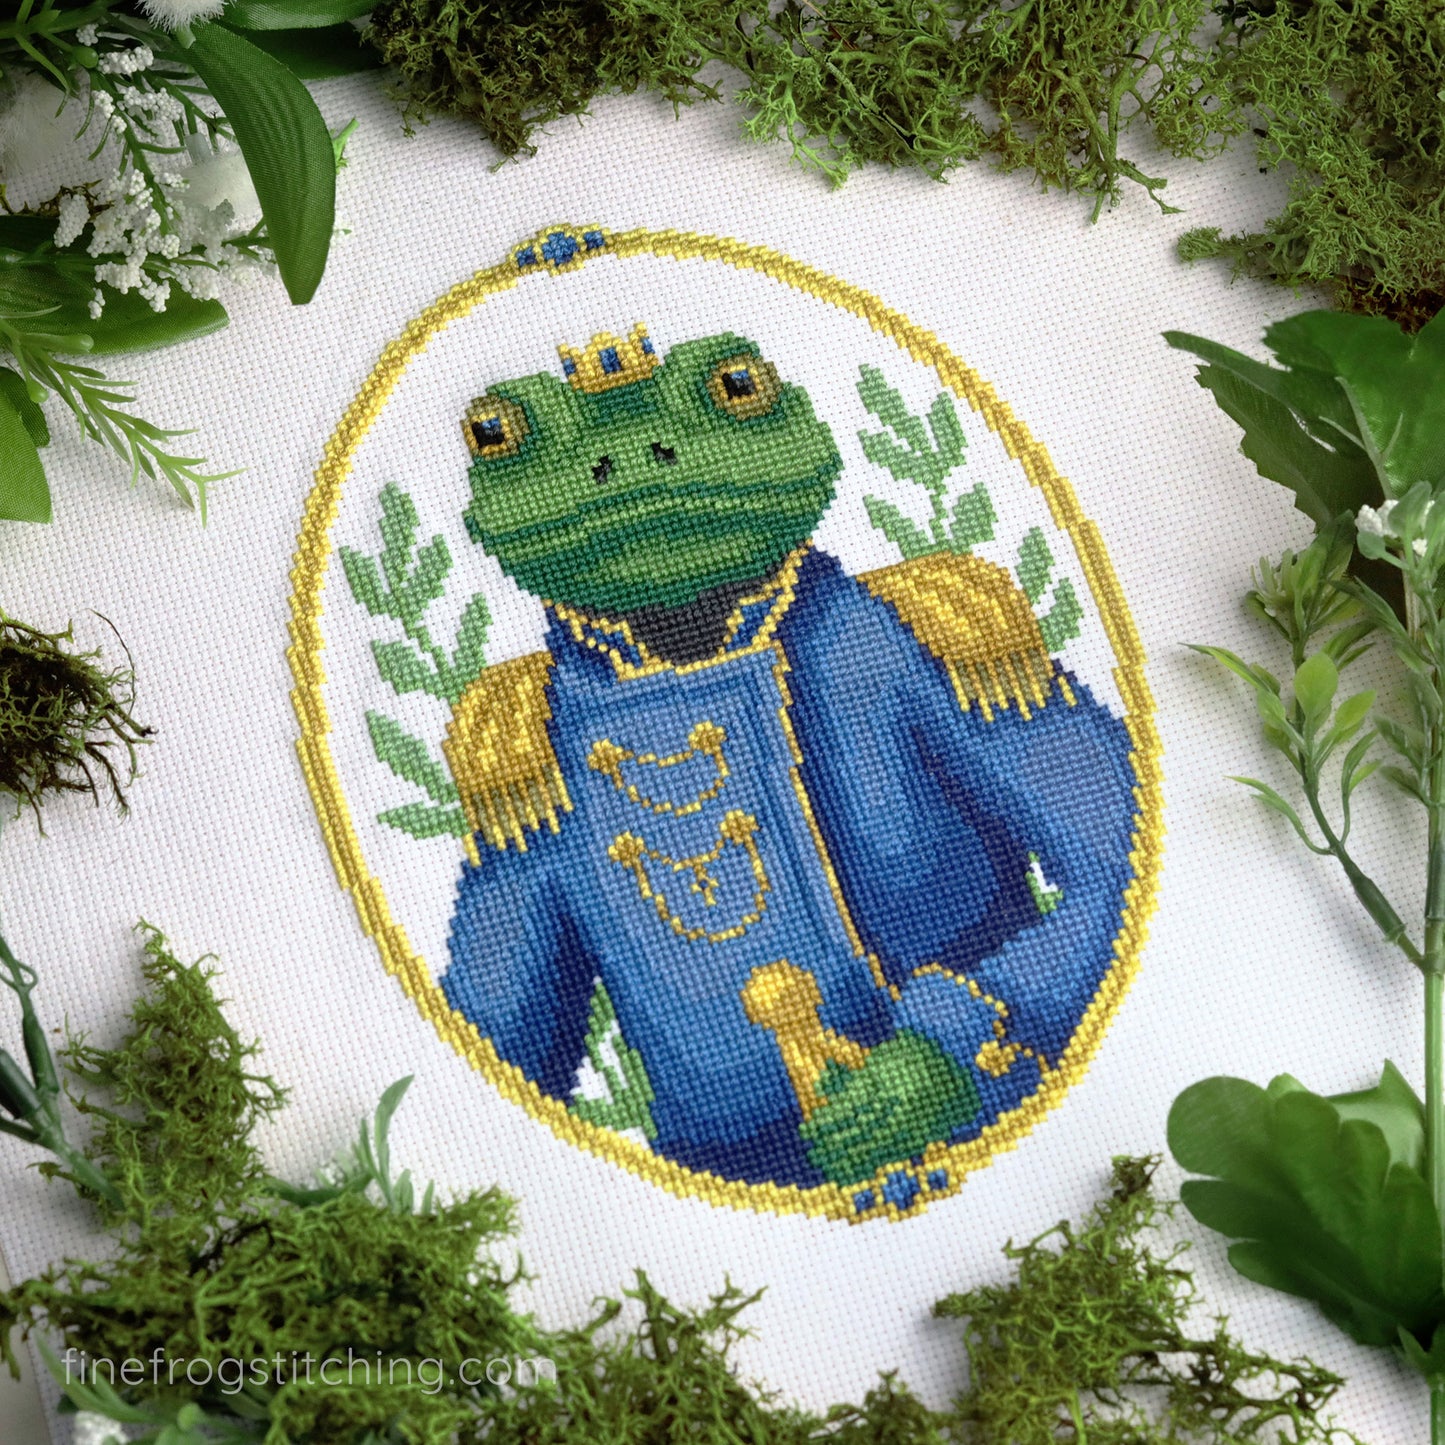 Prince Pondworthy - Large Printed Counted Cross Stitch Chart (Wholesale)